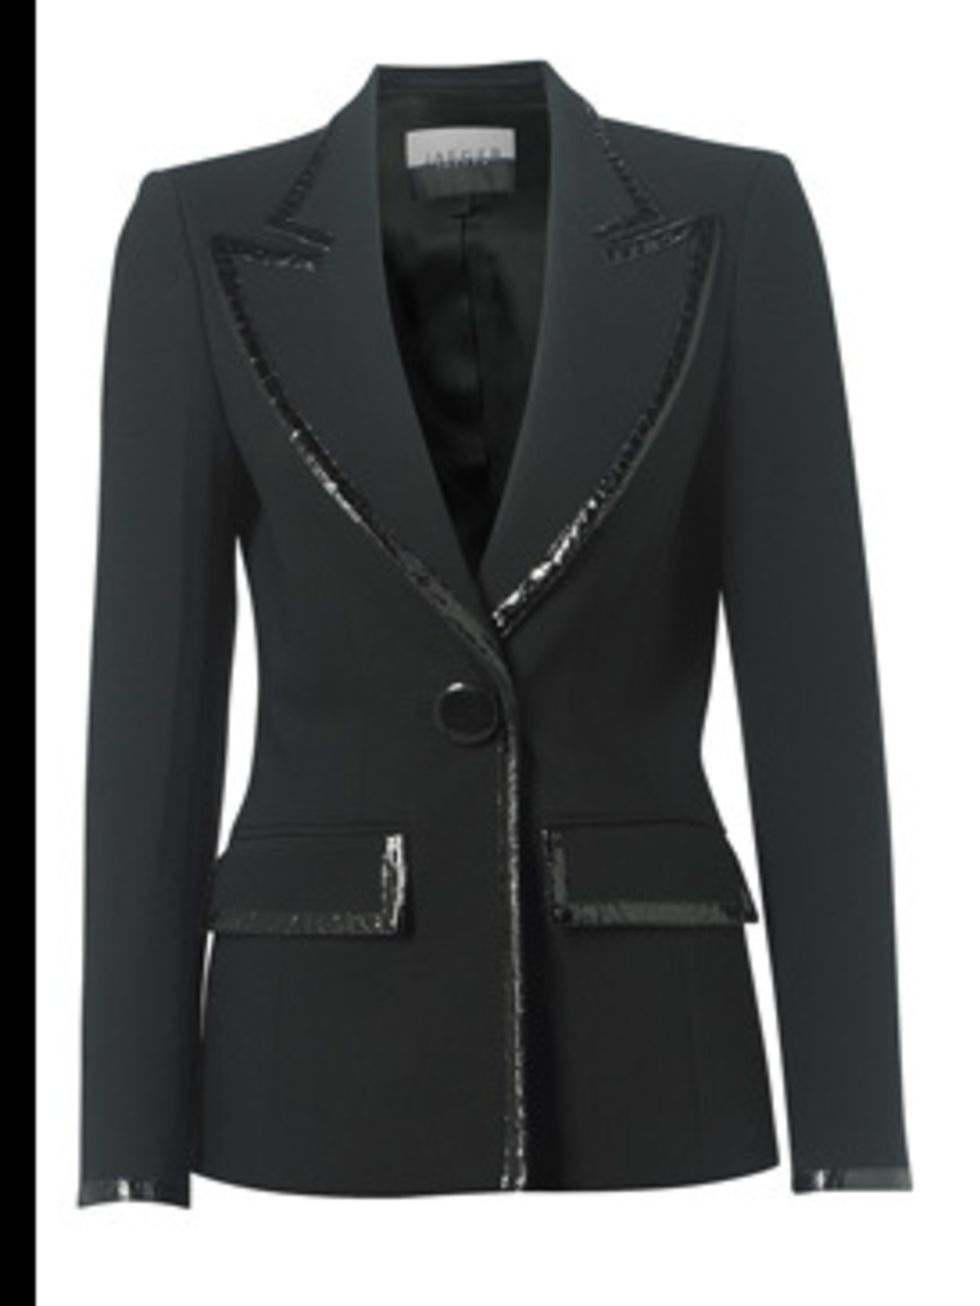 <p>Blazer, £299.00 from <a href="http://www.jaeger.co.uk/index.cfm?page=1094&amp;productid=660021N&amp;productvar=660021N-00100-12&amp;refpage=1372">Jaeger</a></p>